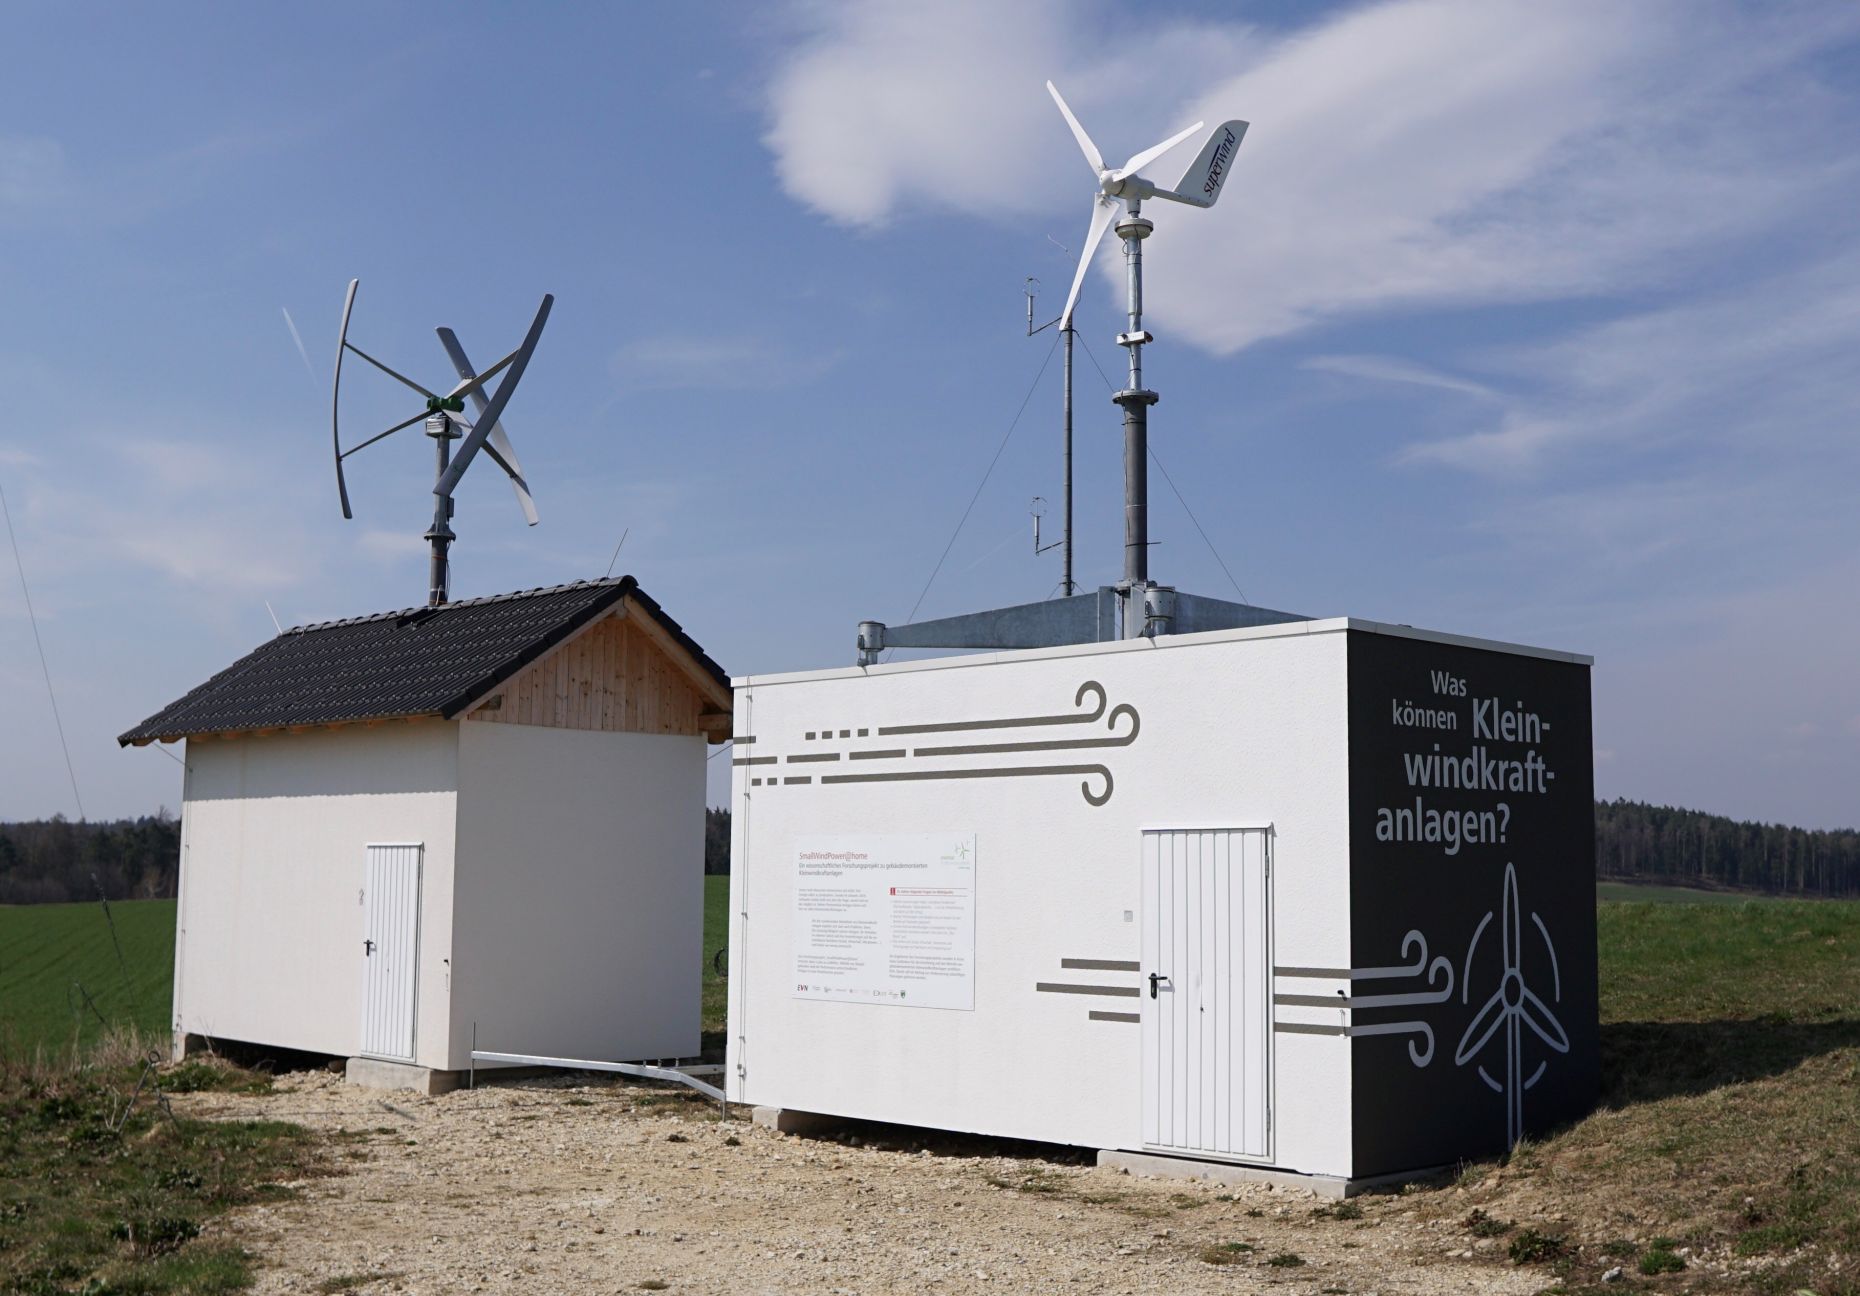 Measurement and testing infrastructure for building mounted Small Wind Turbines at the Energy Research Park Lichtenegg